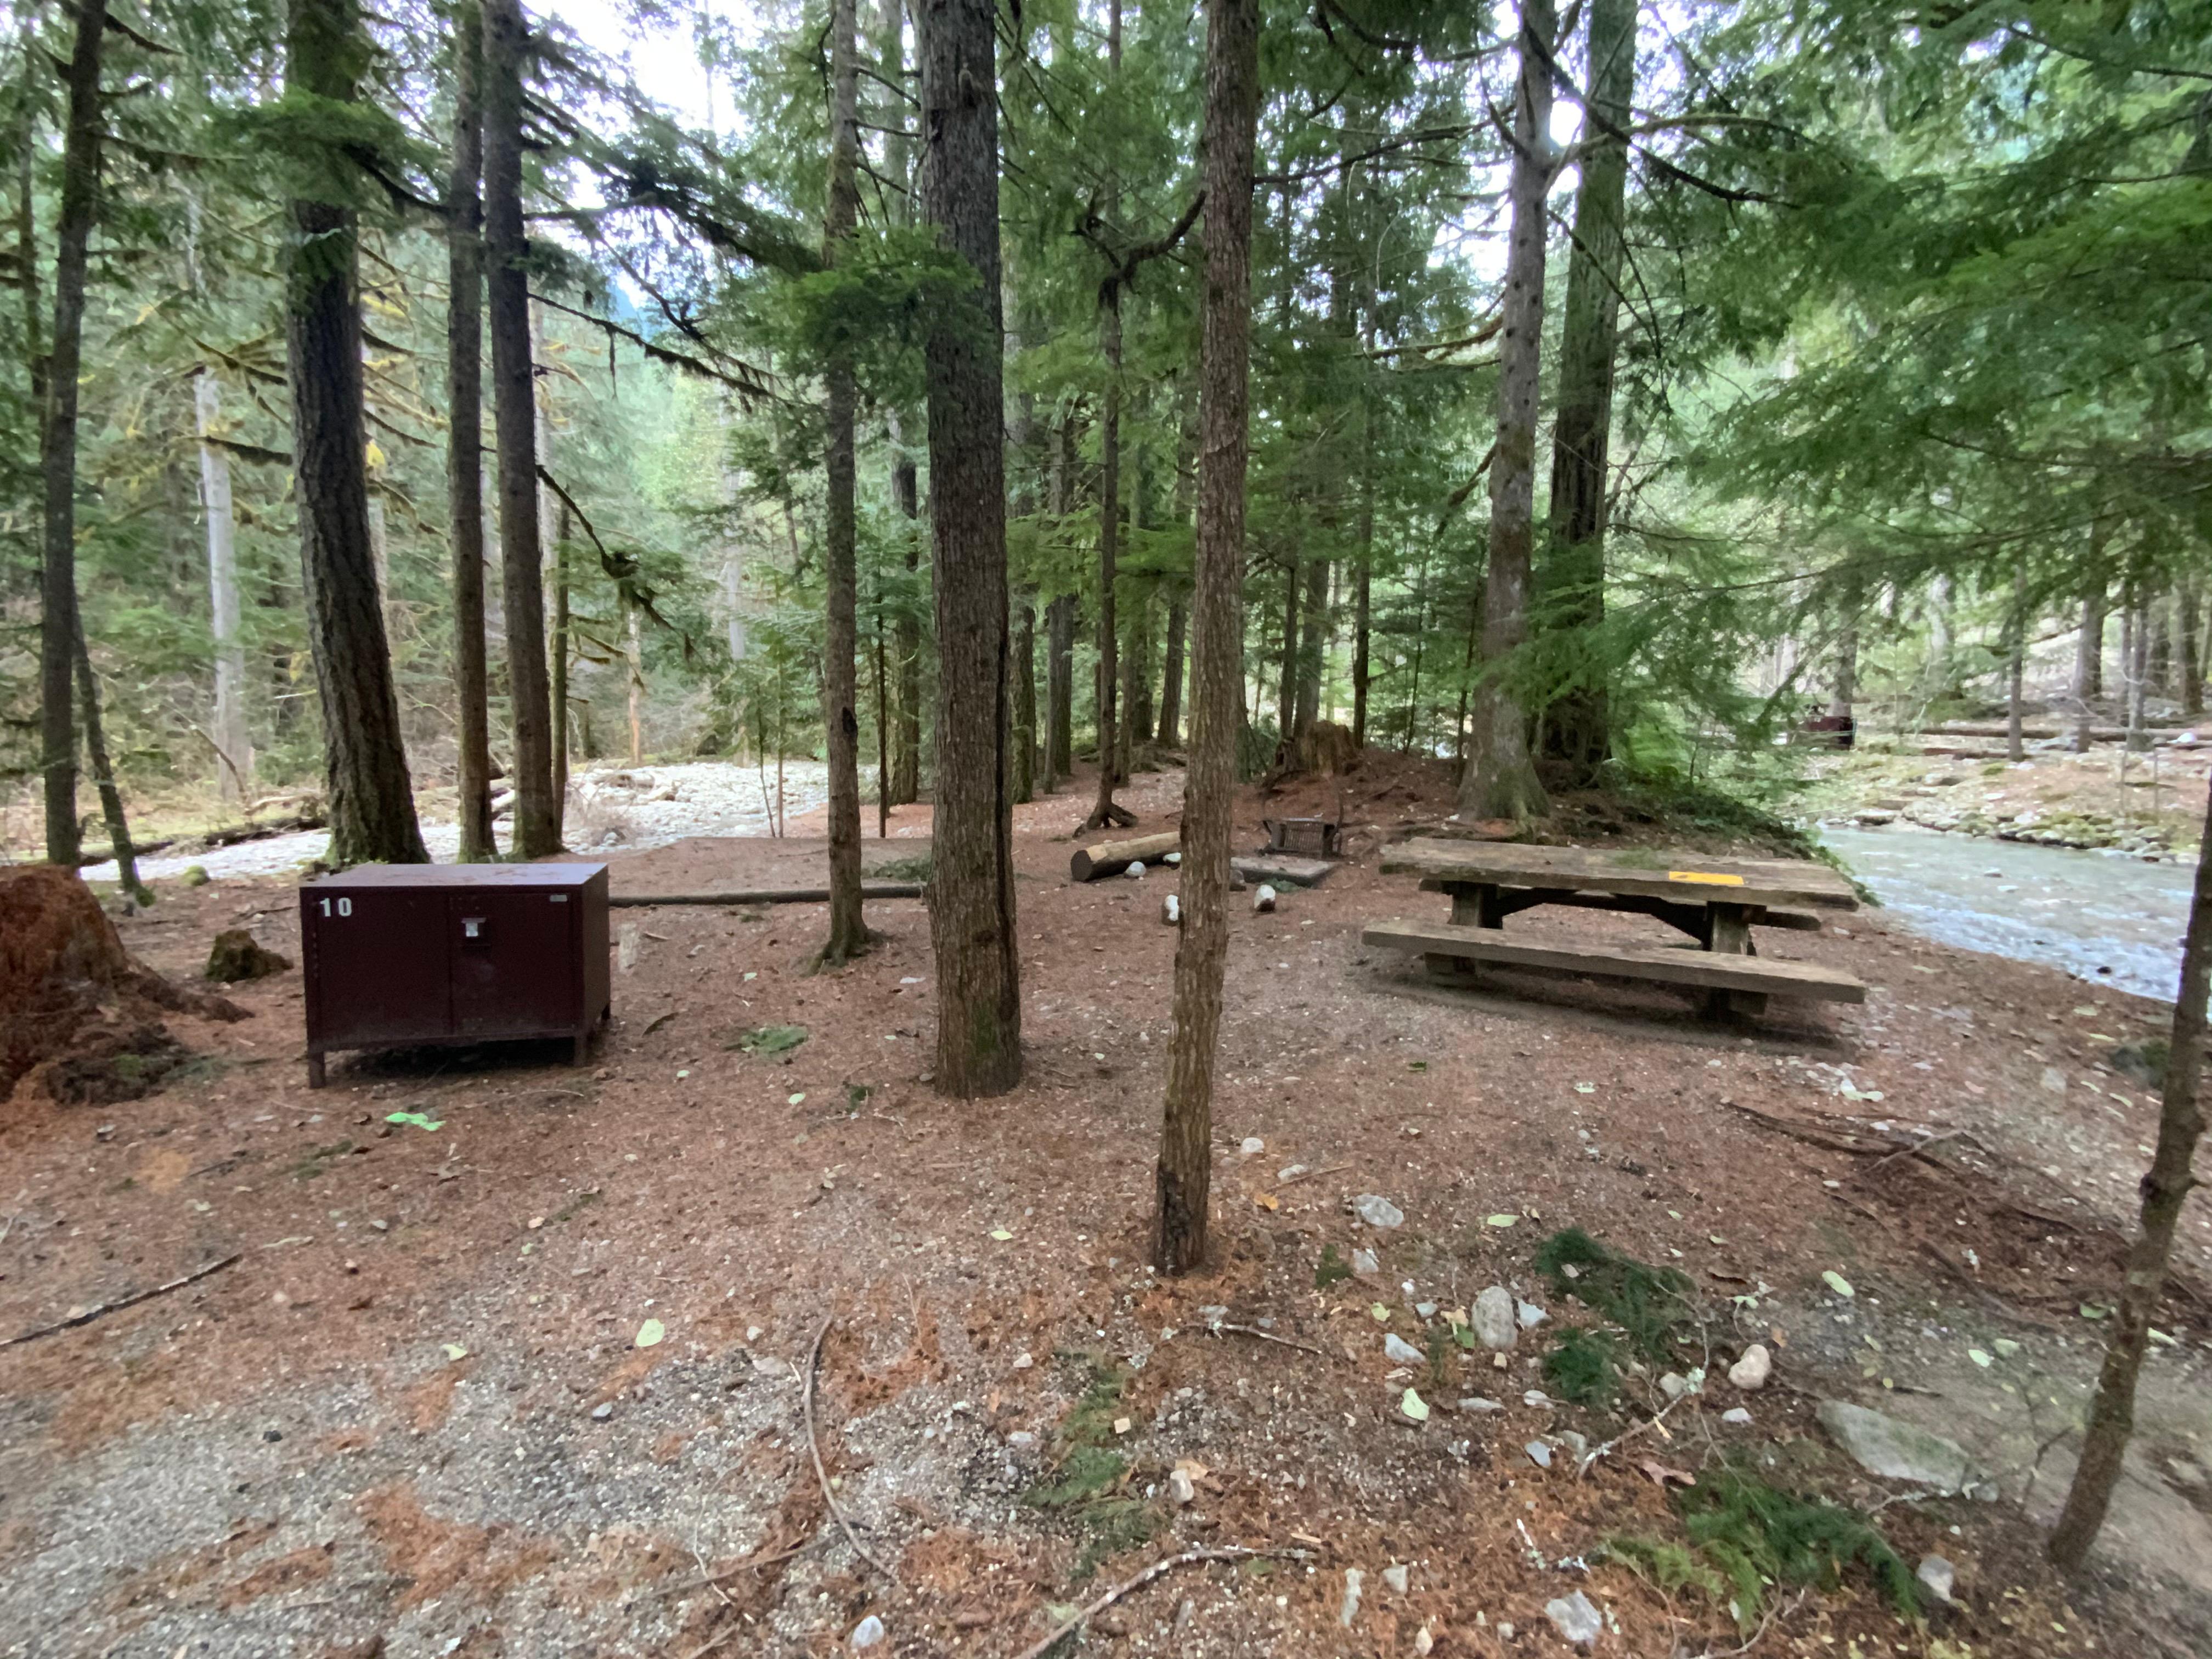 A forested campsite with a picnic table, tent pad, and bear box.